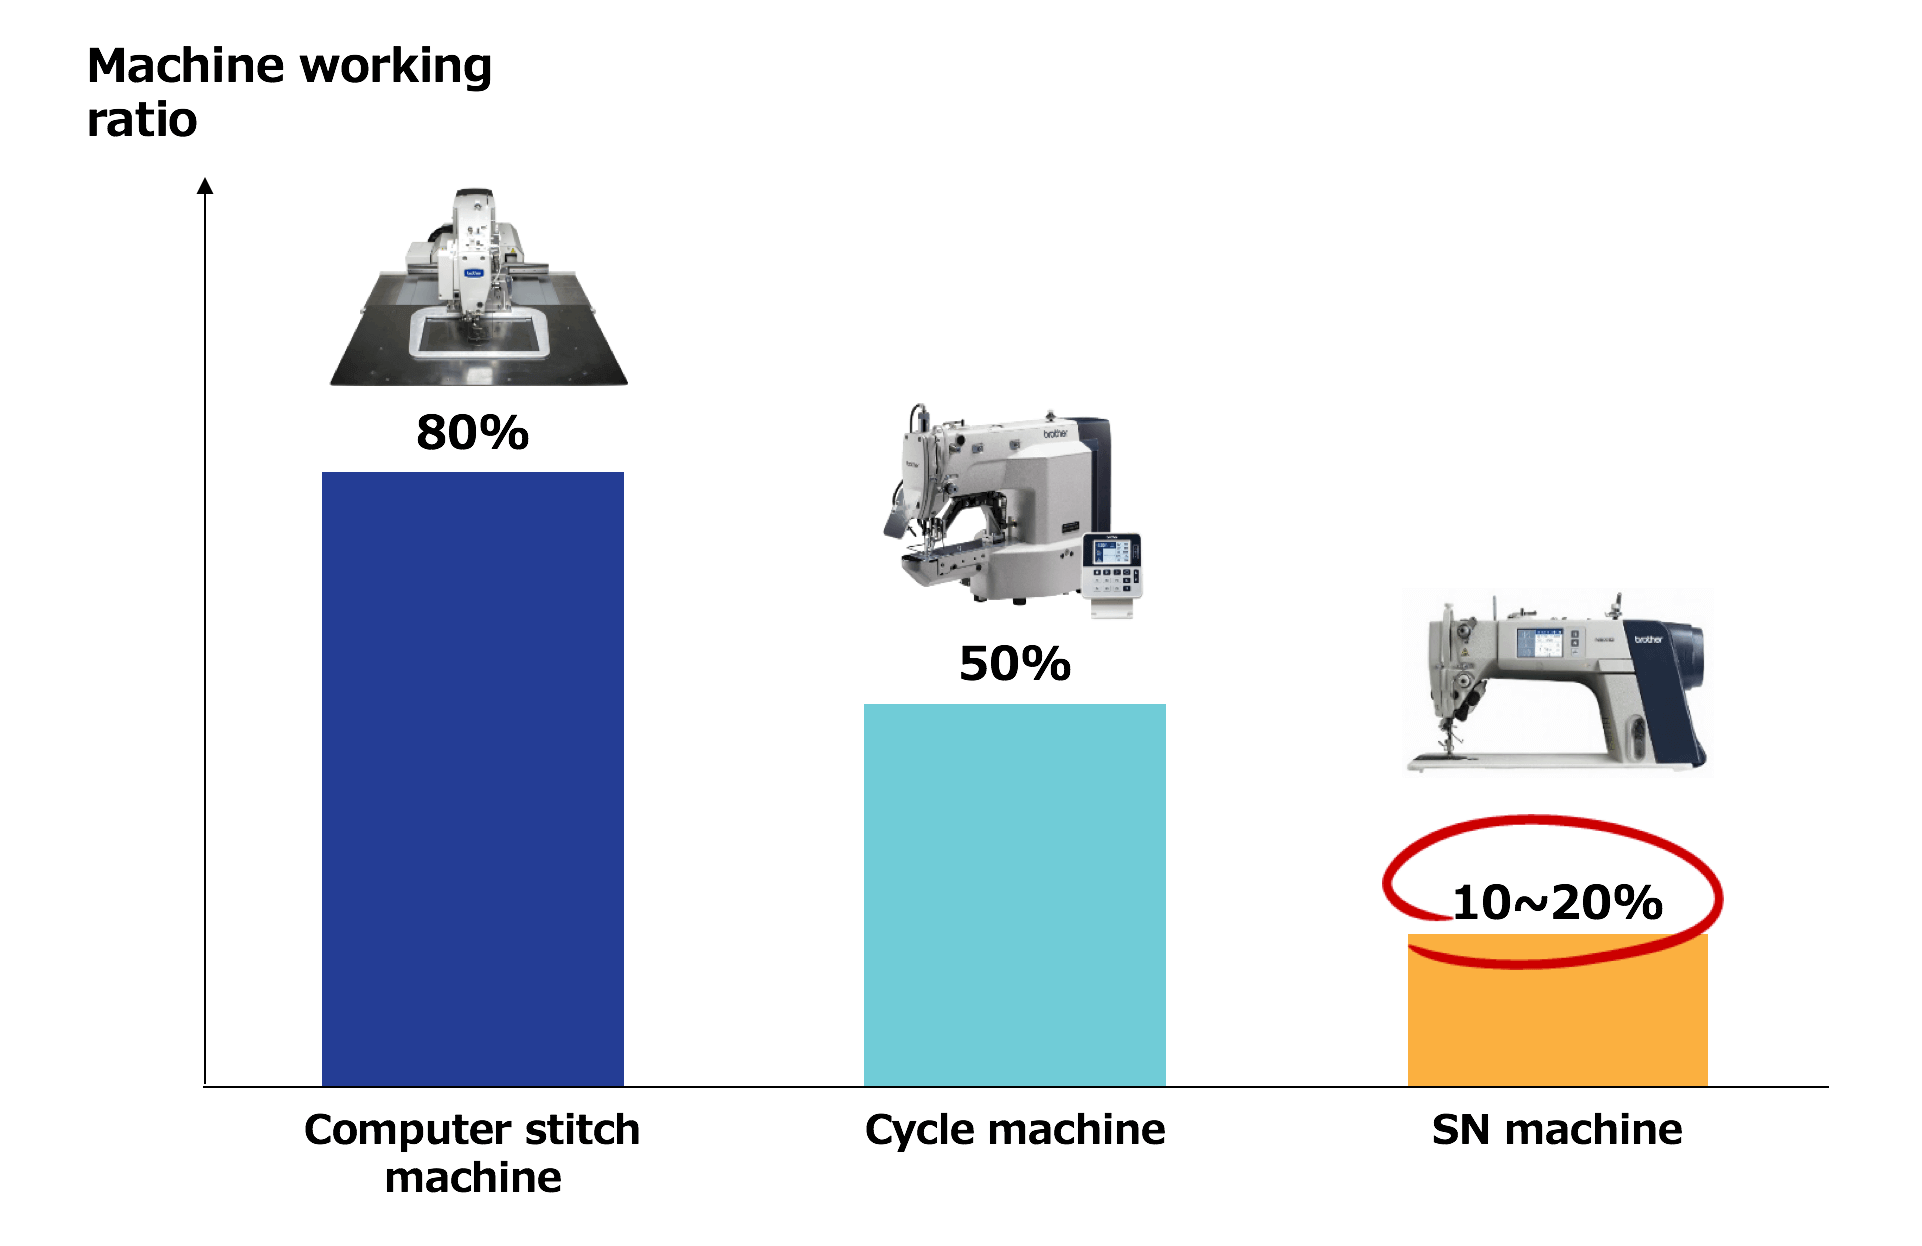 However, SN machines are also the most inefficient! When looking at total working time, SN machines only spend 10-20% of total time on sewing.